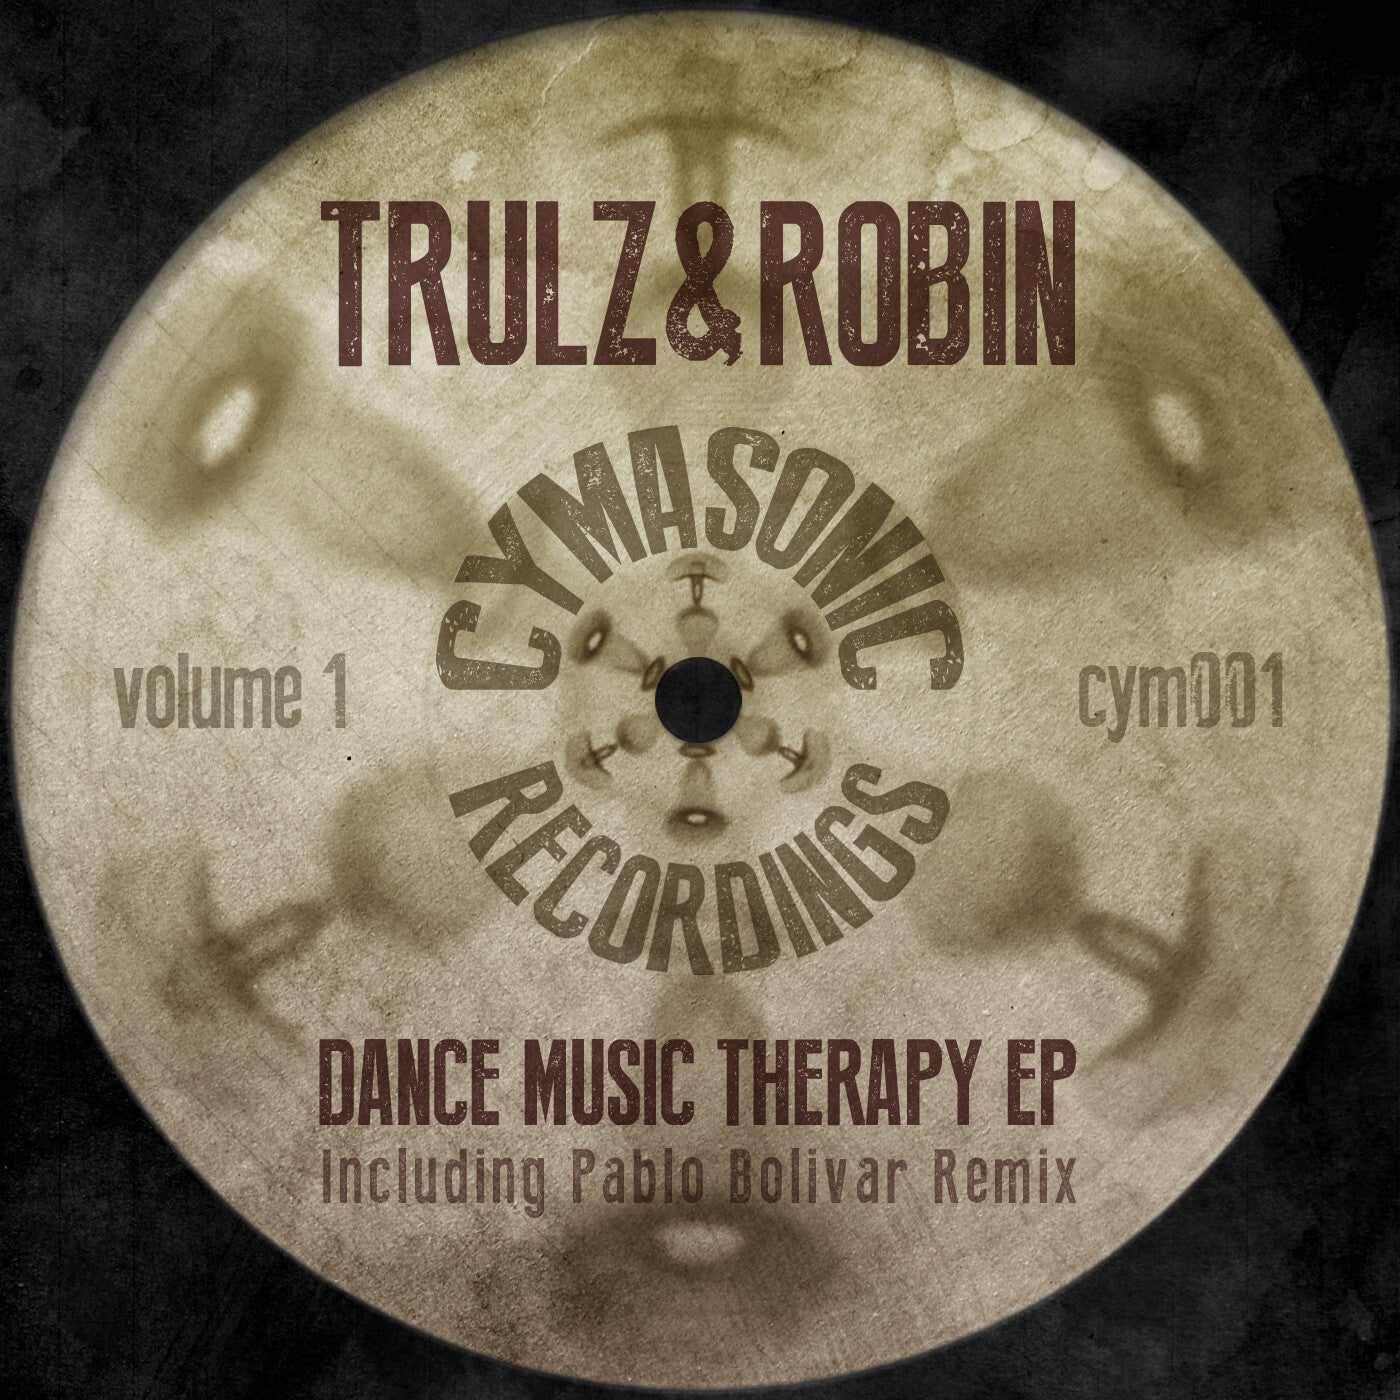 Dance Music Therapy EP, Vol. 1